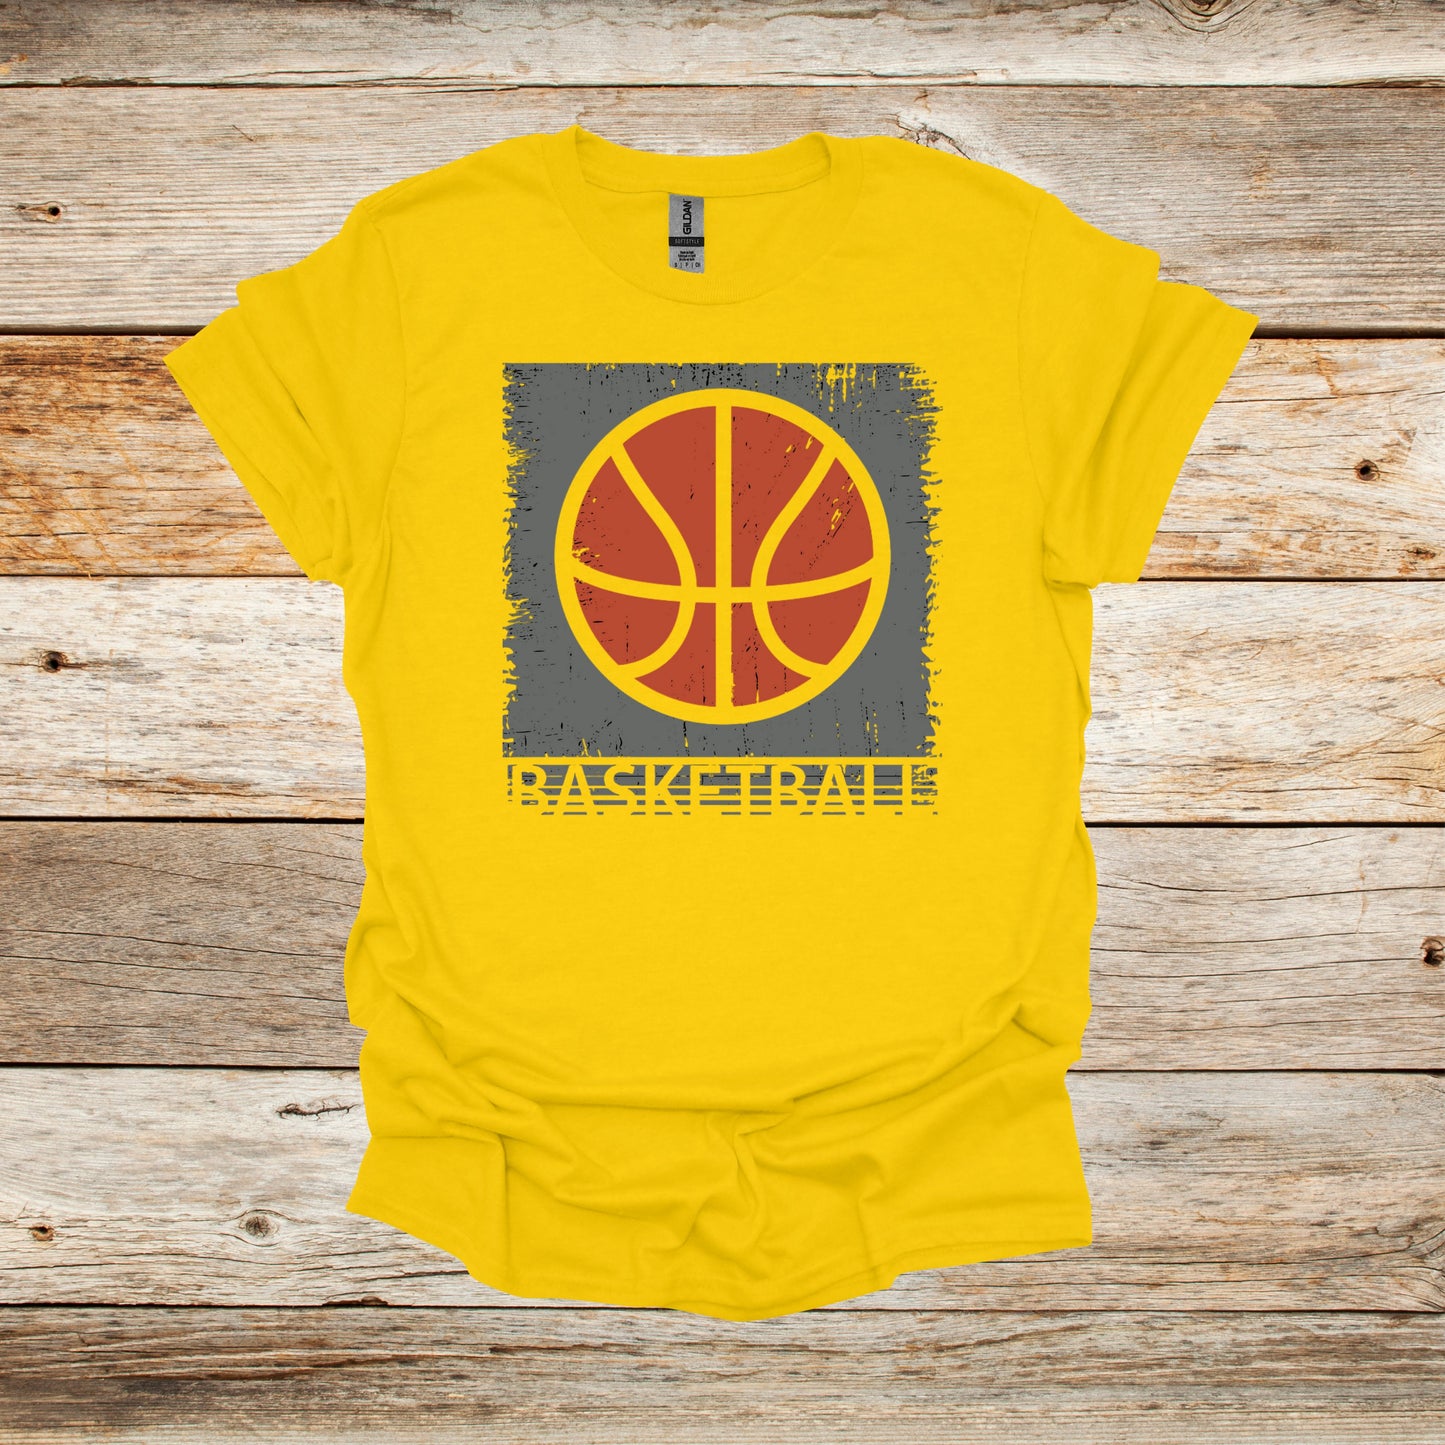 Basketball T-Shirt - Adult and Children's Tee Shirts - Sports T-Shirts Graphic Avenue Daisy Adult Small 